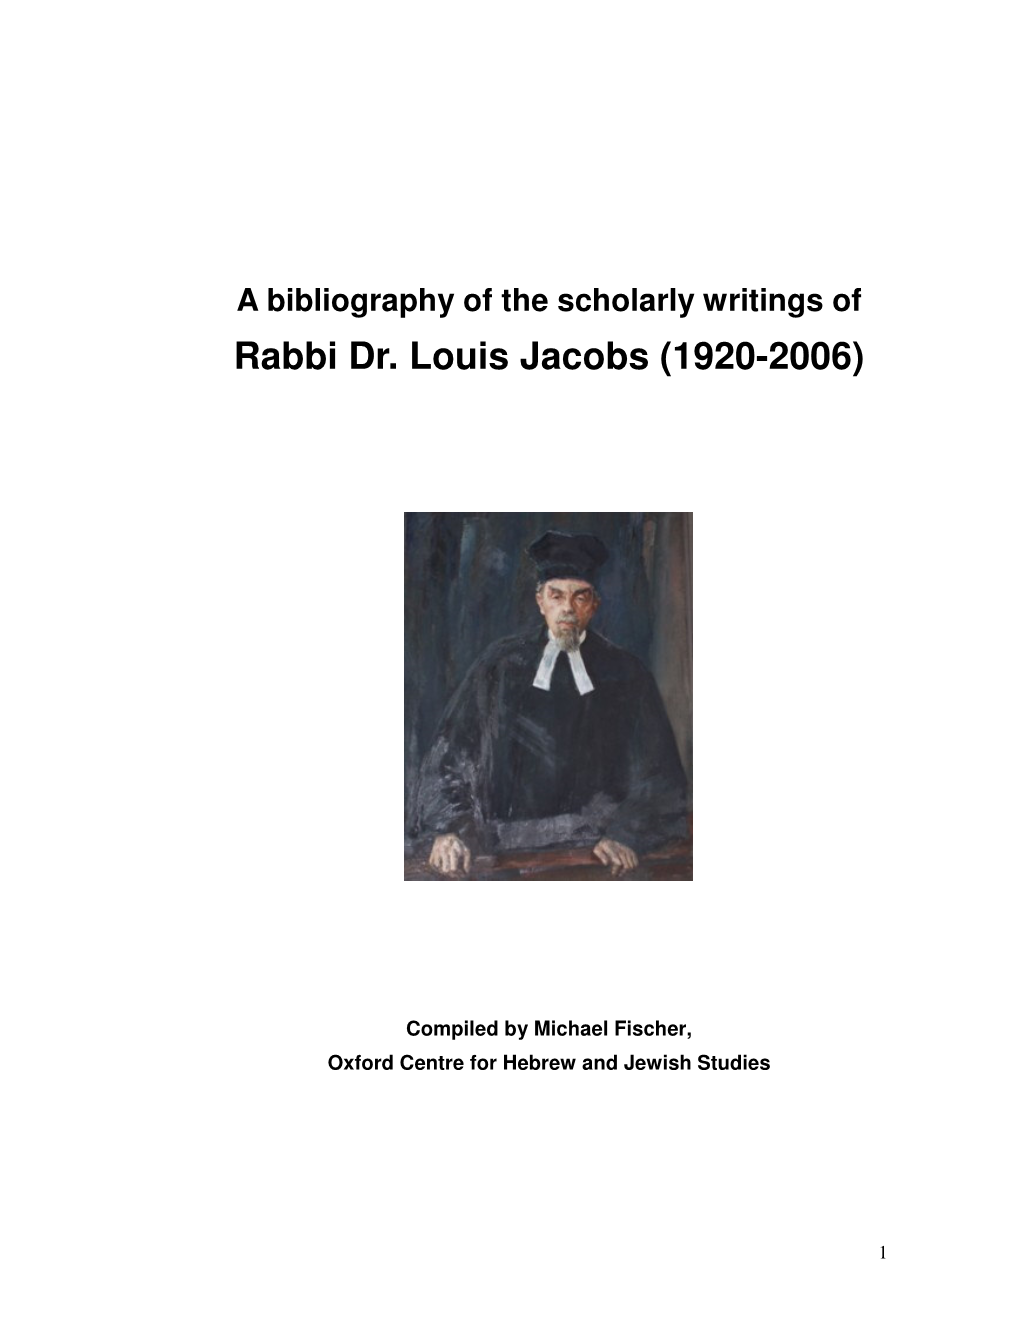 A Bibliography of Scholarly Writings of Rabbi Dr. Louis Jacobs (1920-2006)